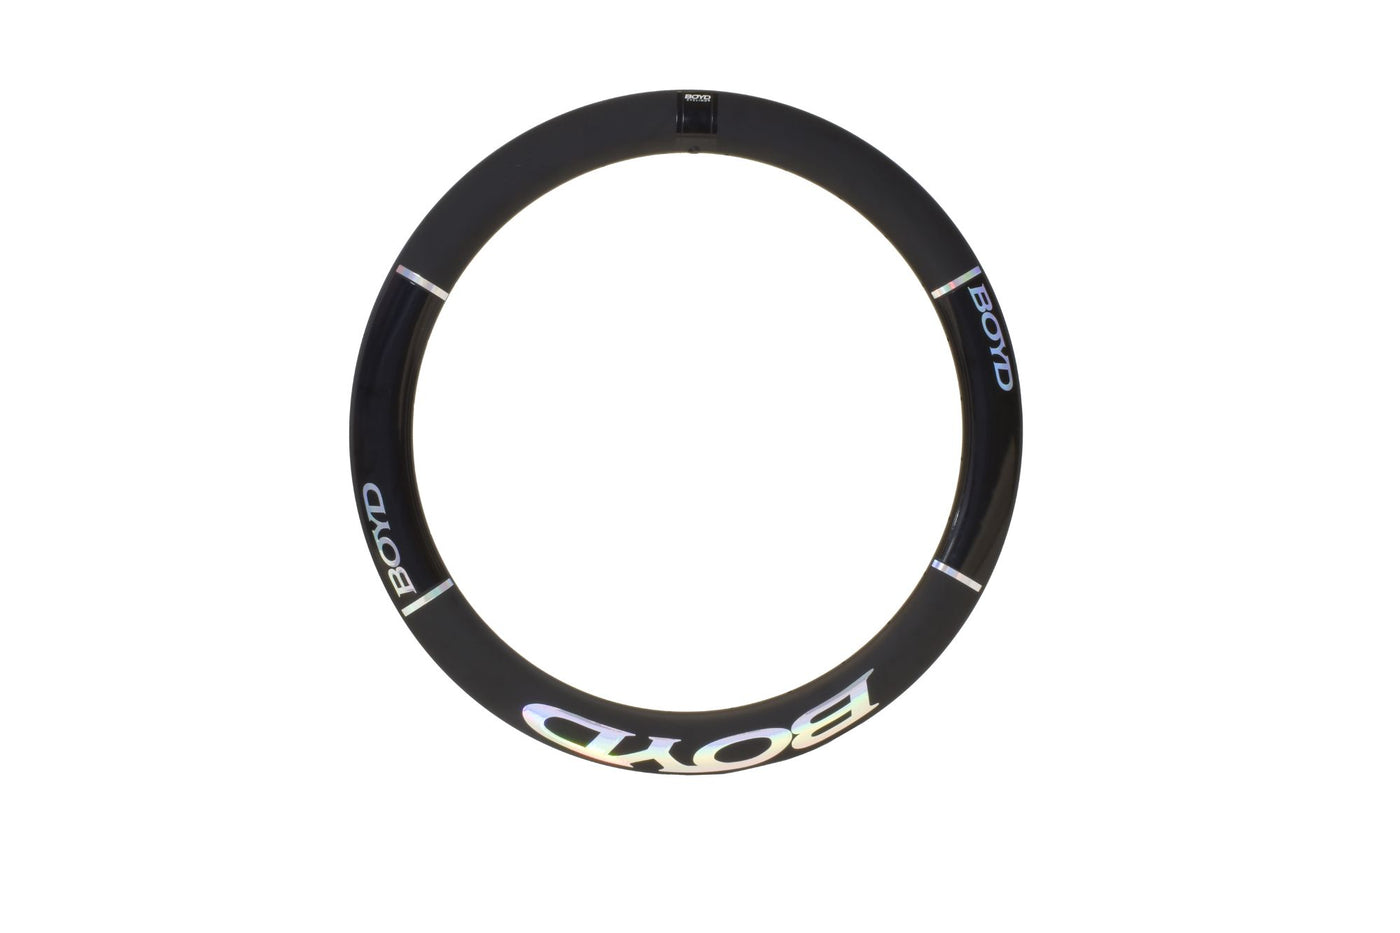 60mm Carbon Clincher Front Wheel